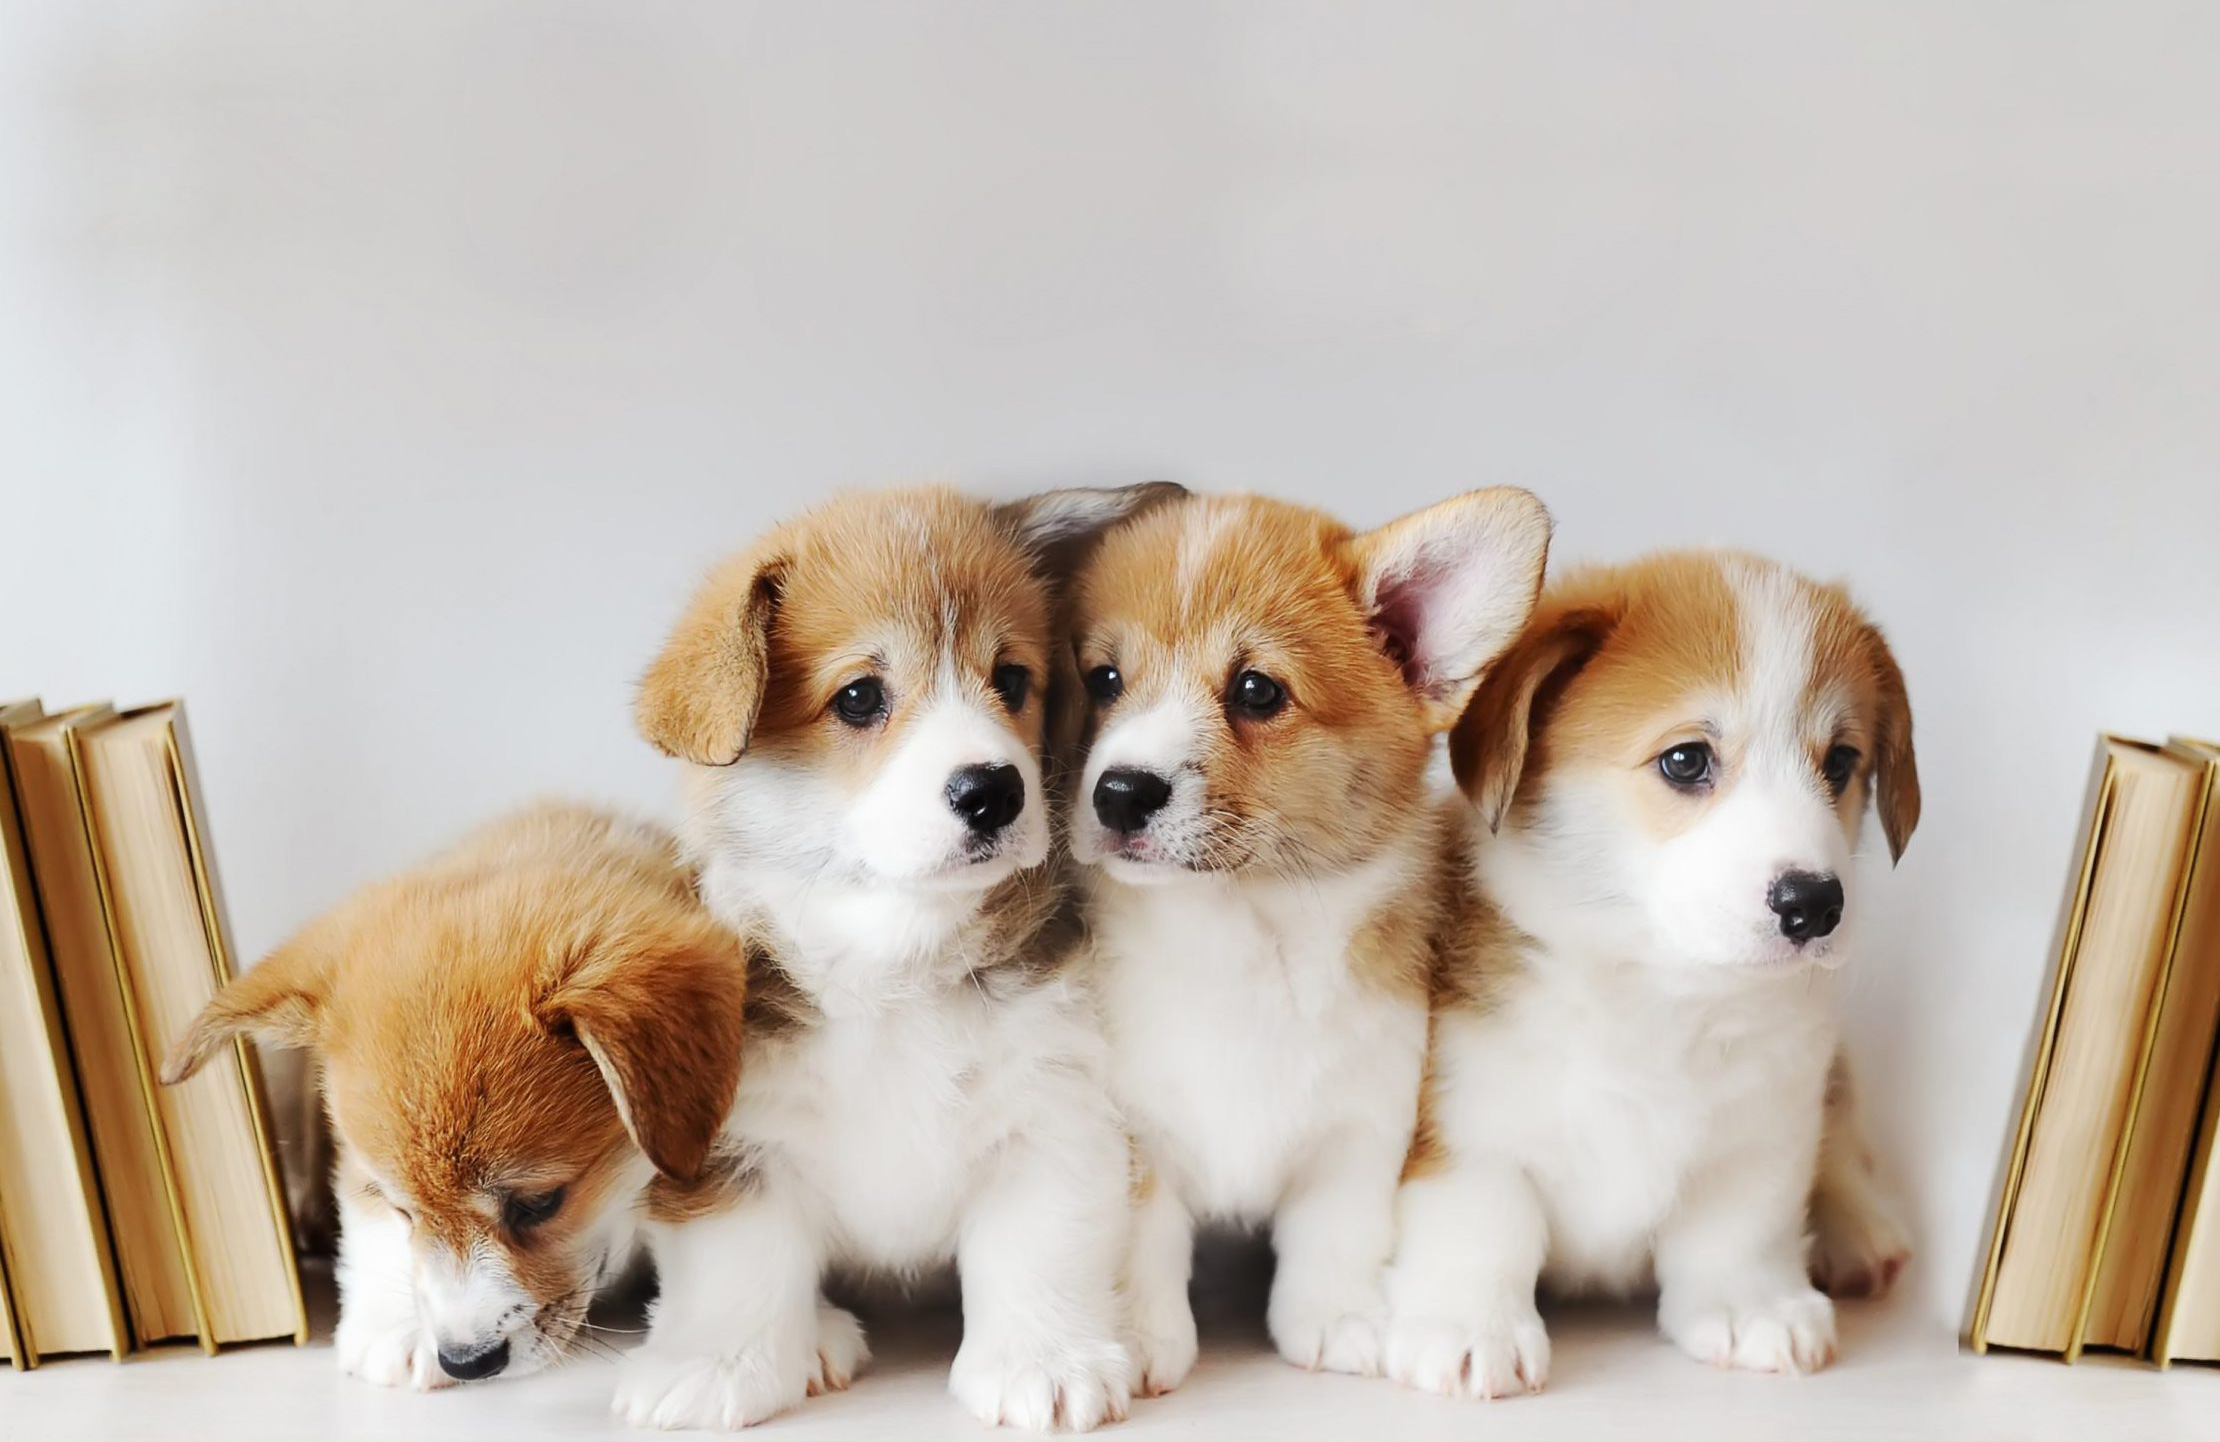 Adorable puppy pictures that will make you melt | Reader's Digest Asia